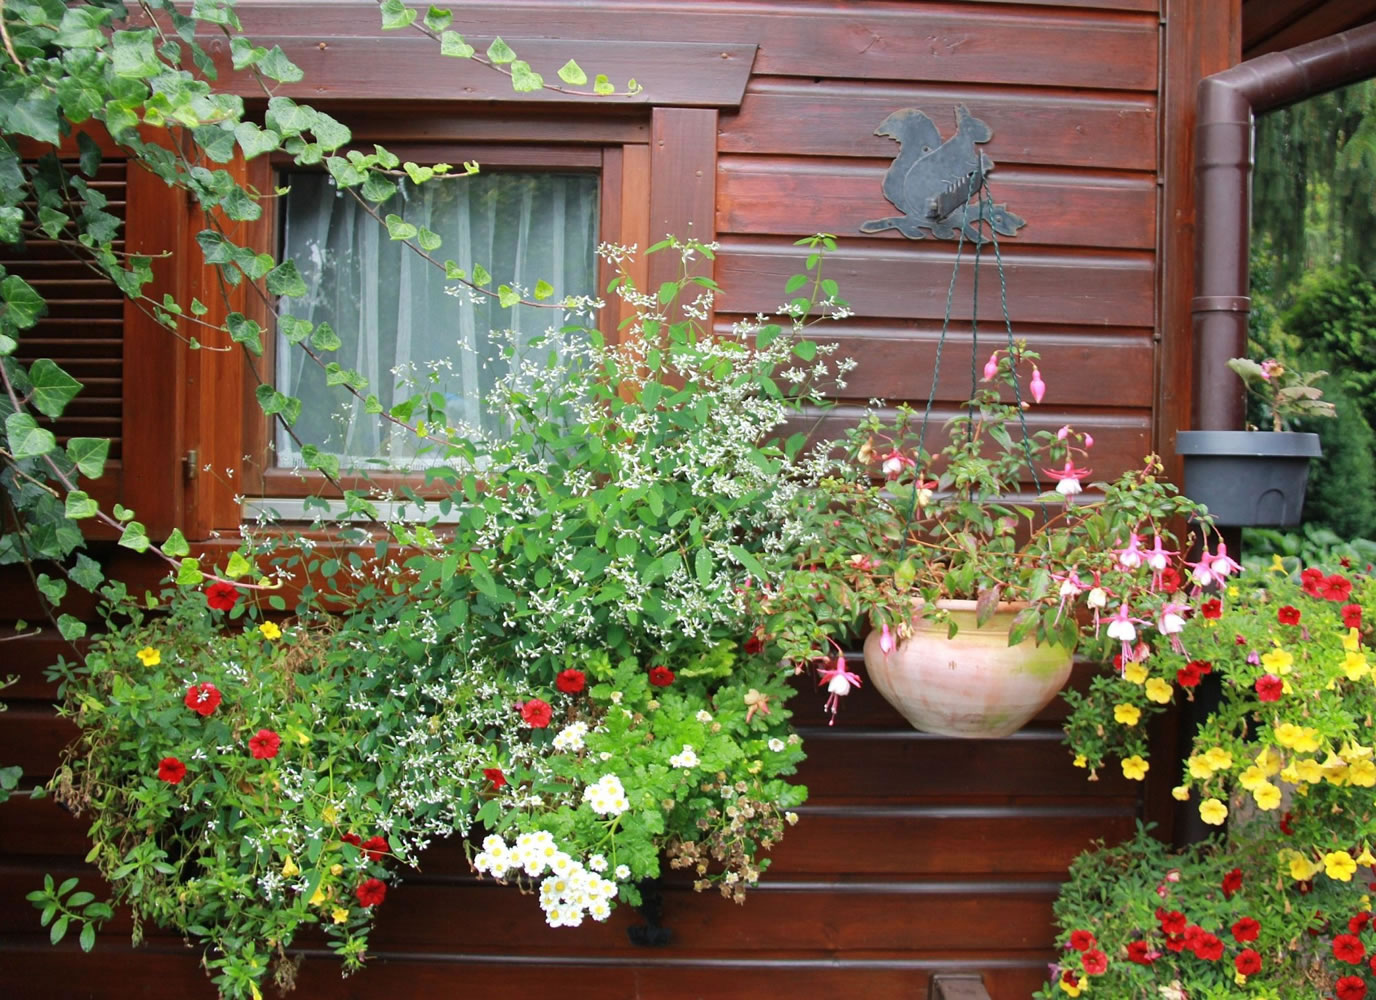 Robb Rosser
Hanging flower baskets add a splash of color to the house and garden in mid-spring.